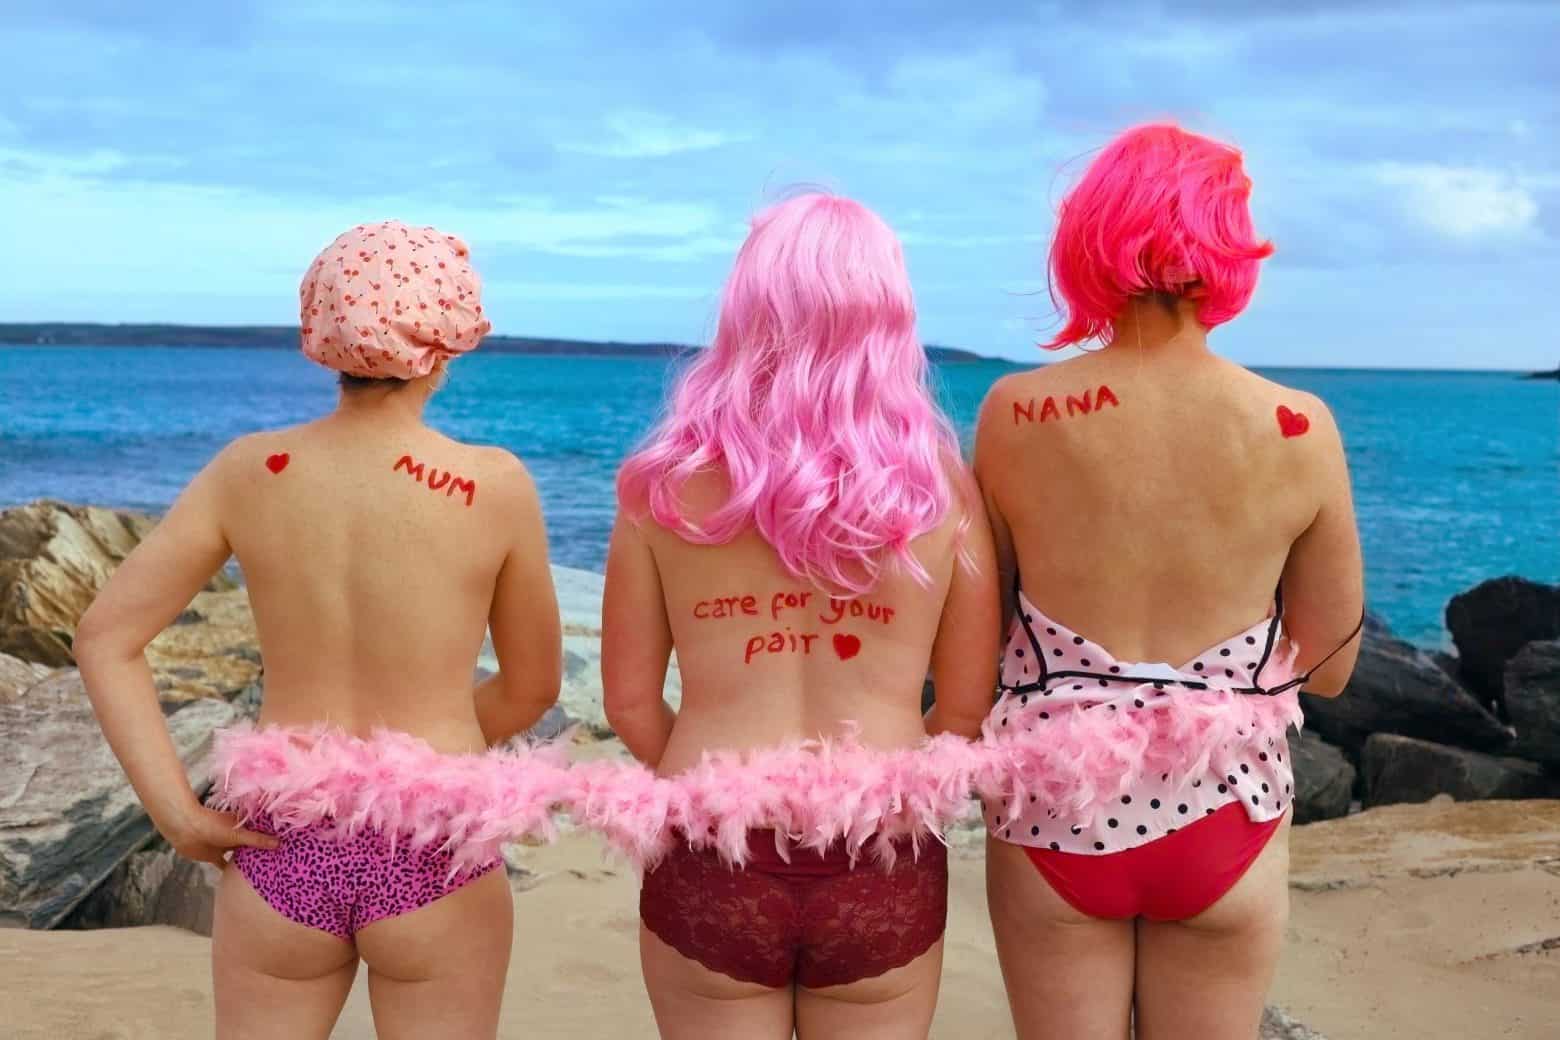 https://cravingcork.ie/wp-content/uploads/2022/10/Image_1_The-Pink-Knickers-Swim_Clonakilty_Photo-by-Melissa-Iwane-scaled-e1665421491697.jpg